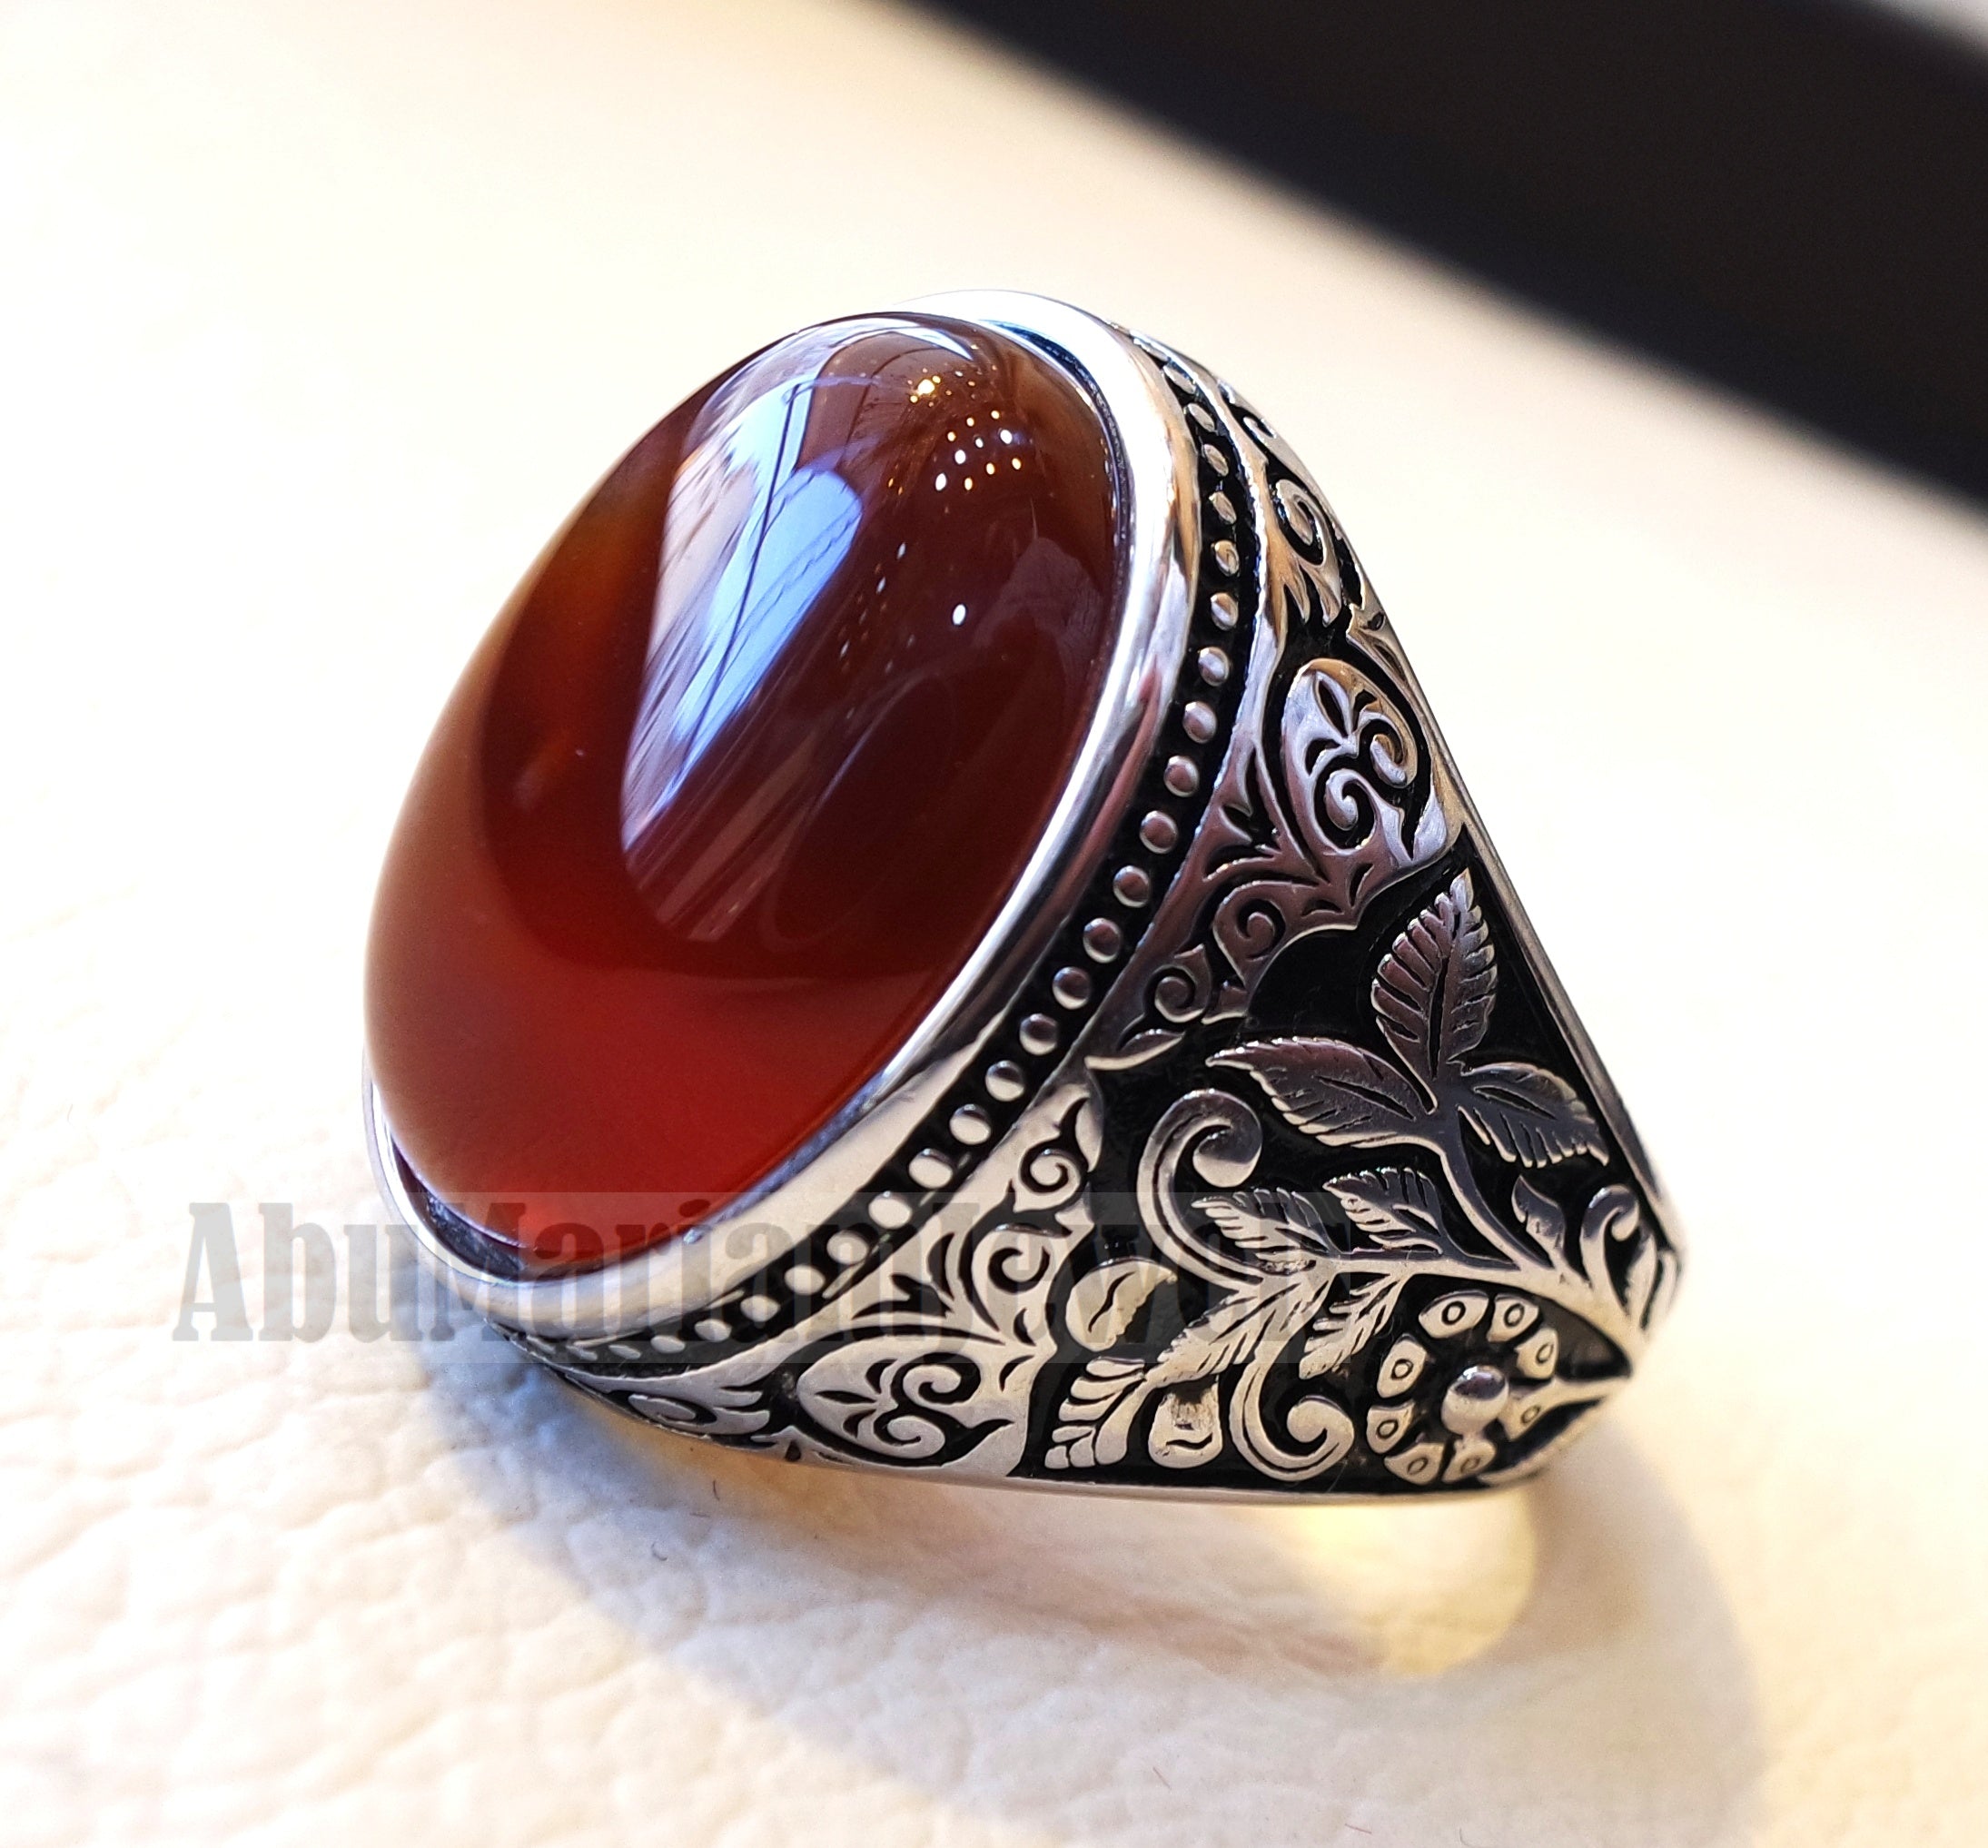 Buy 925 Sterling Silver Agate Stone Ring, Natural Agate Ring, Aqeeq Men's  Ring, Jewelry for Men, 925 Silver Jewelry, Gift for Him, Agate Jewelry  Online in India - Etsy